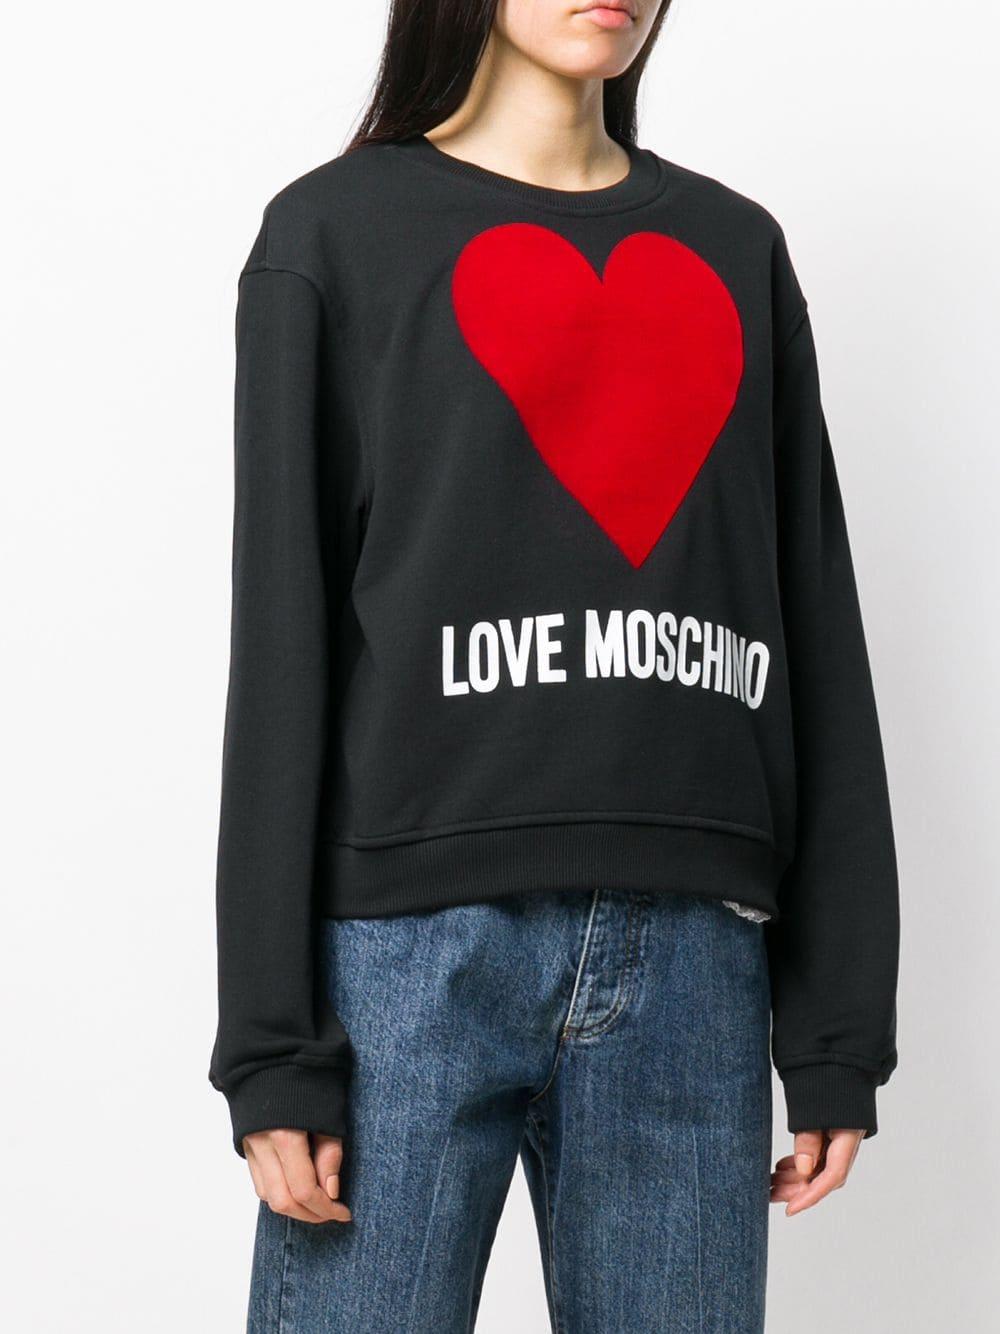 Love Moschino Cotton Heart Graphic Sweater in Black | Lyst